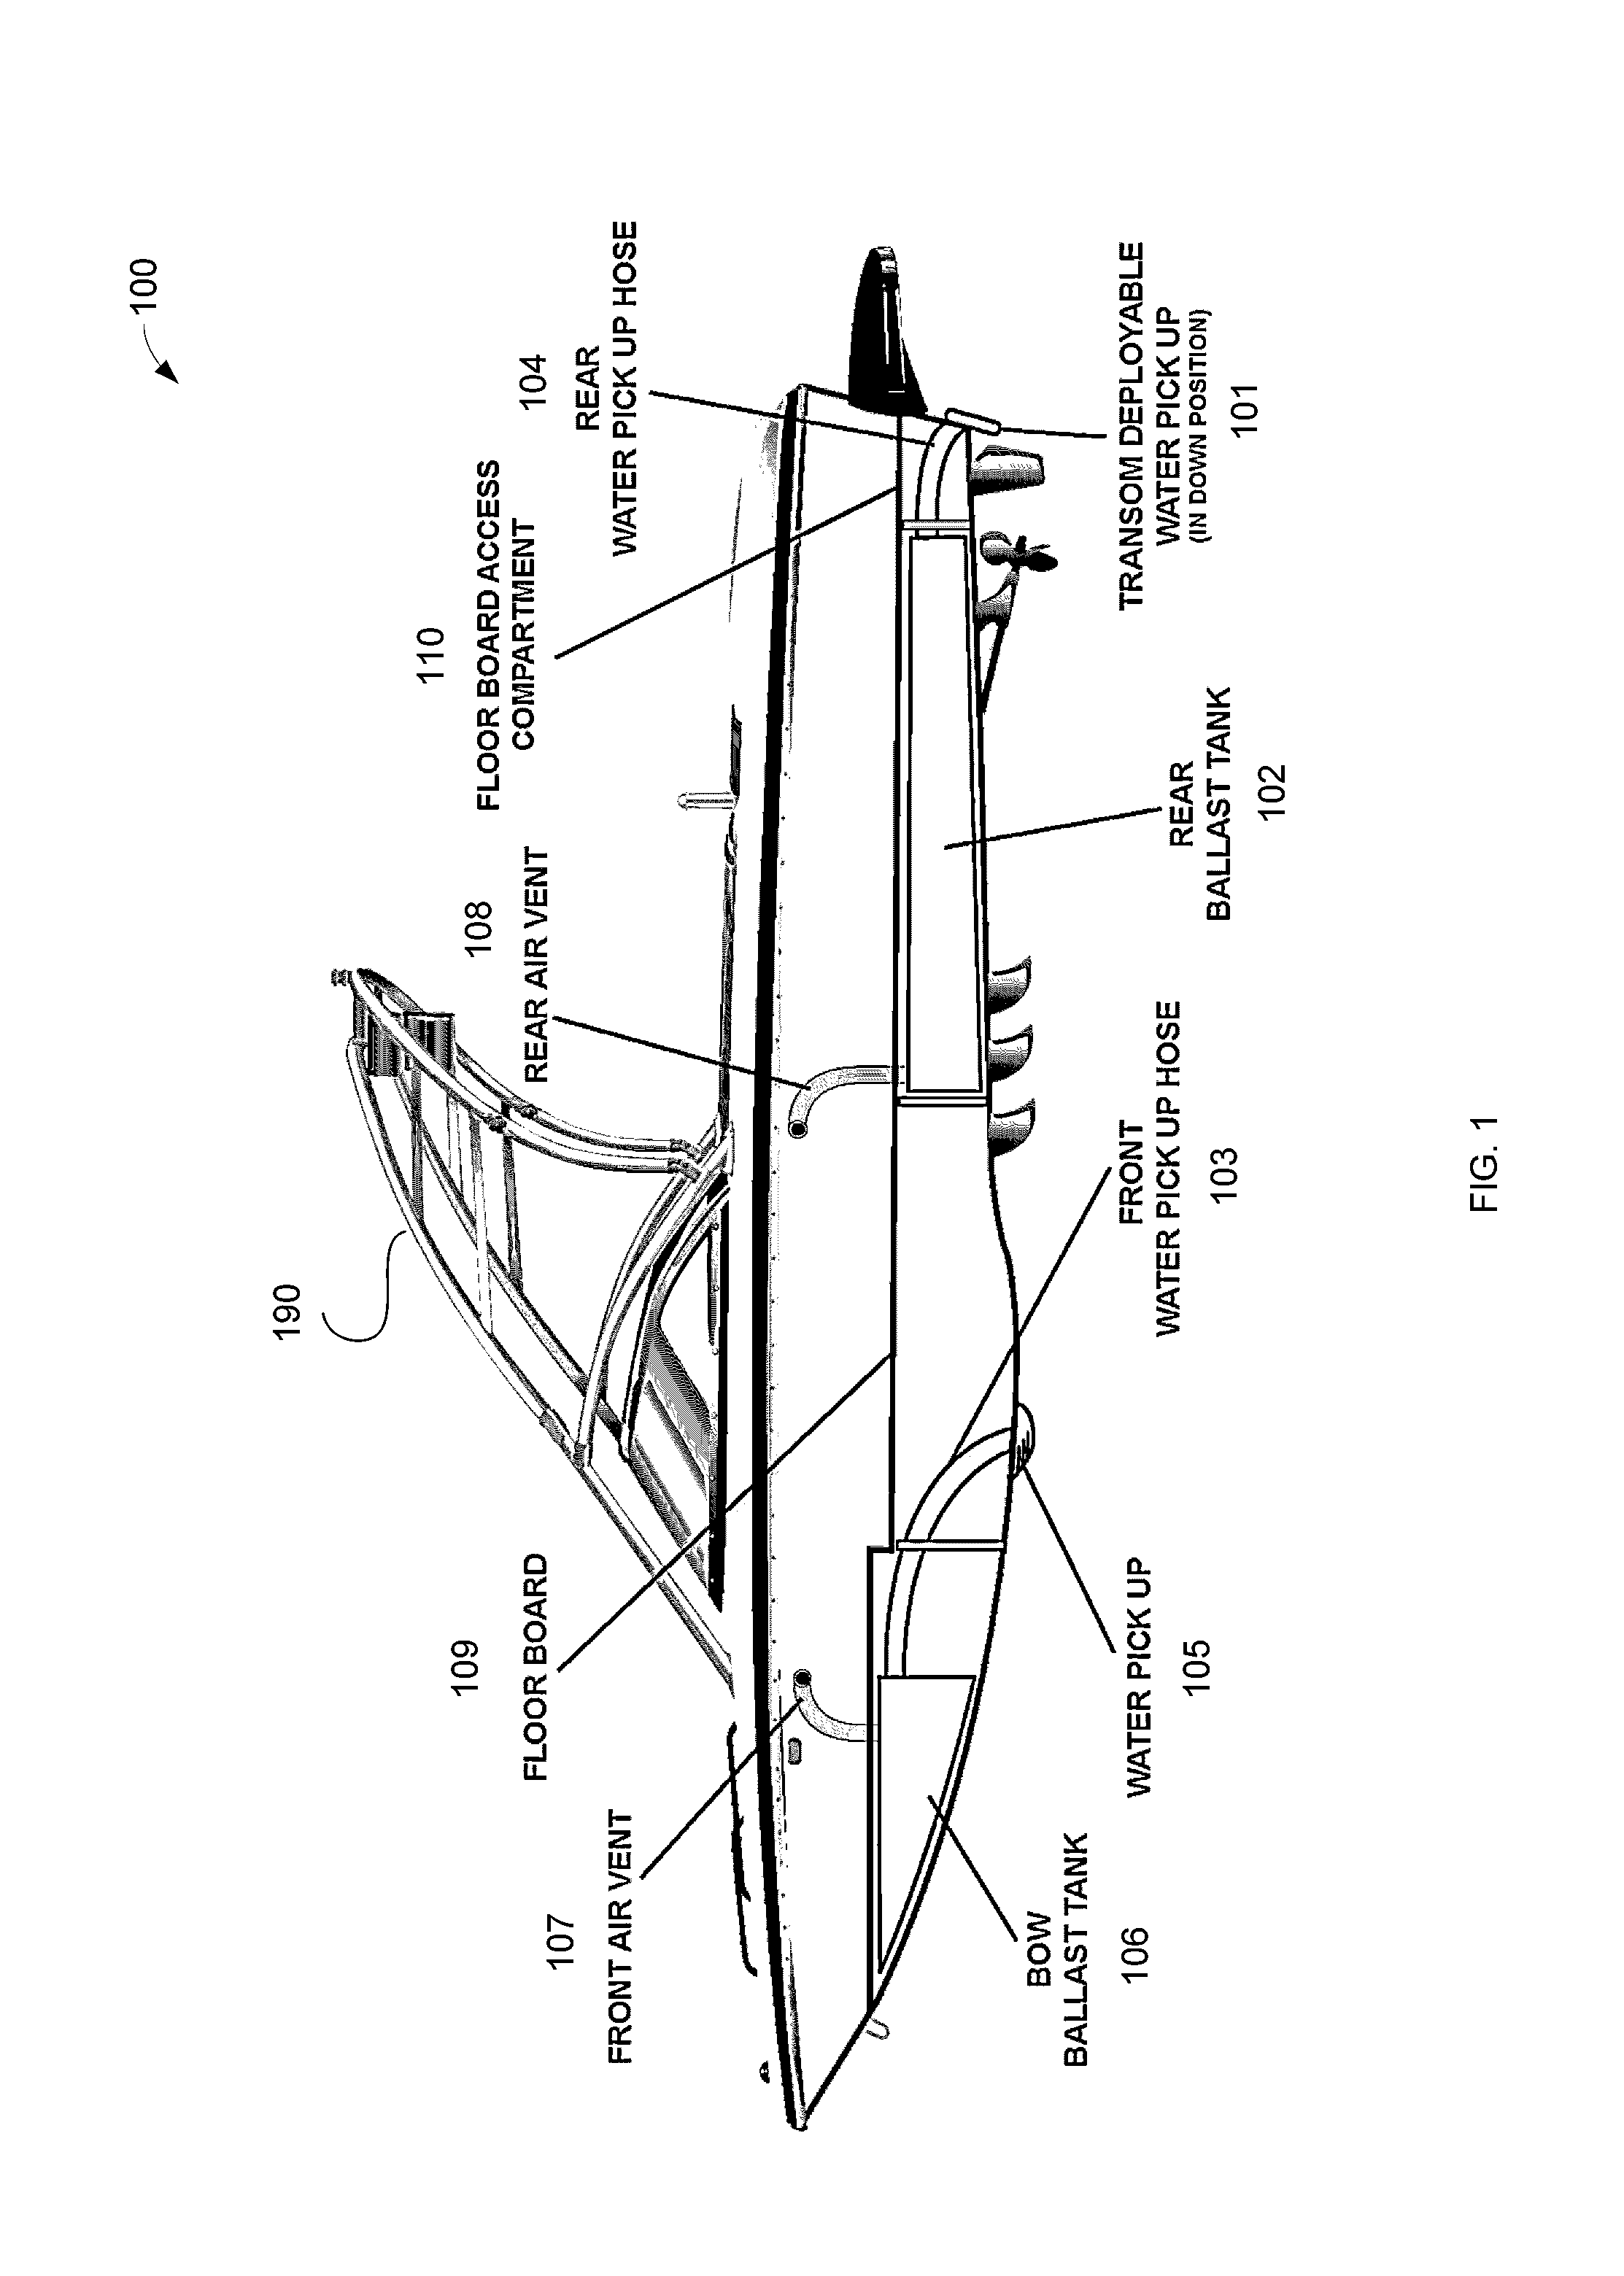 Method and apparatus for wake enlargement system